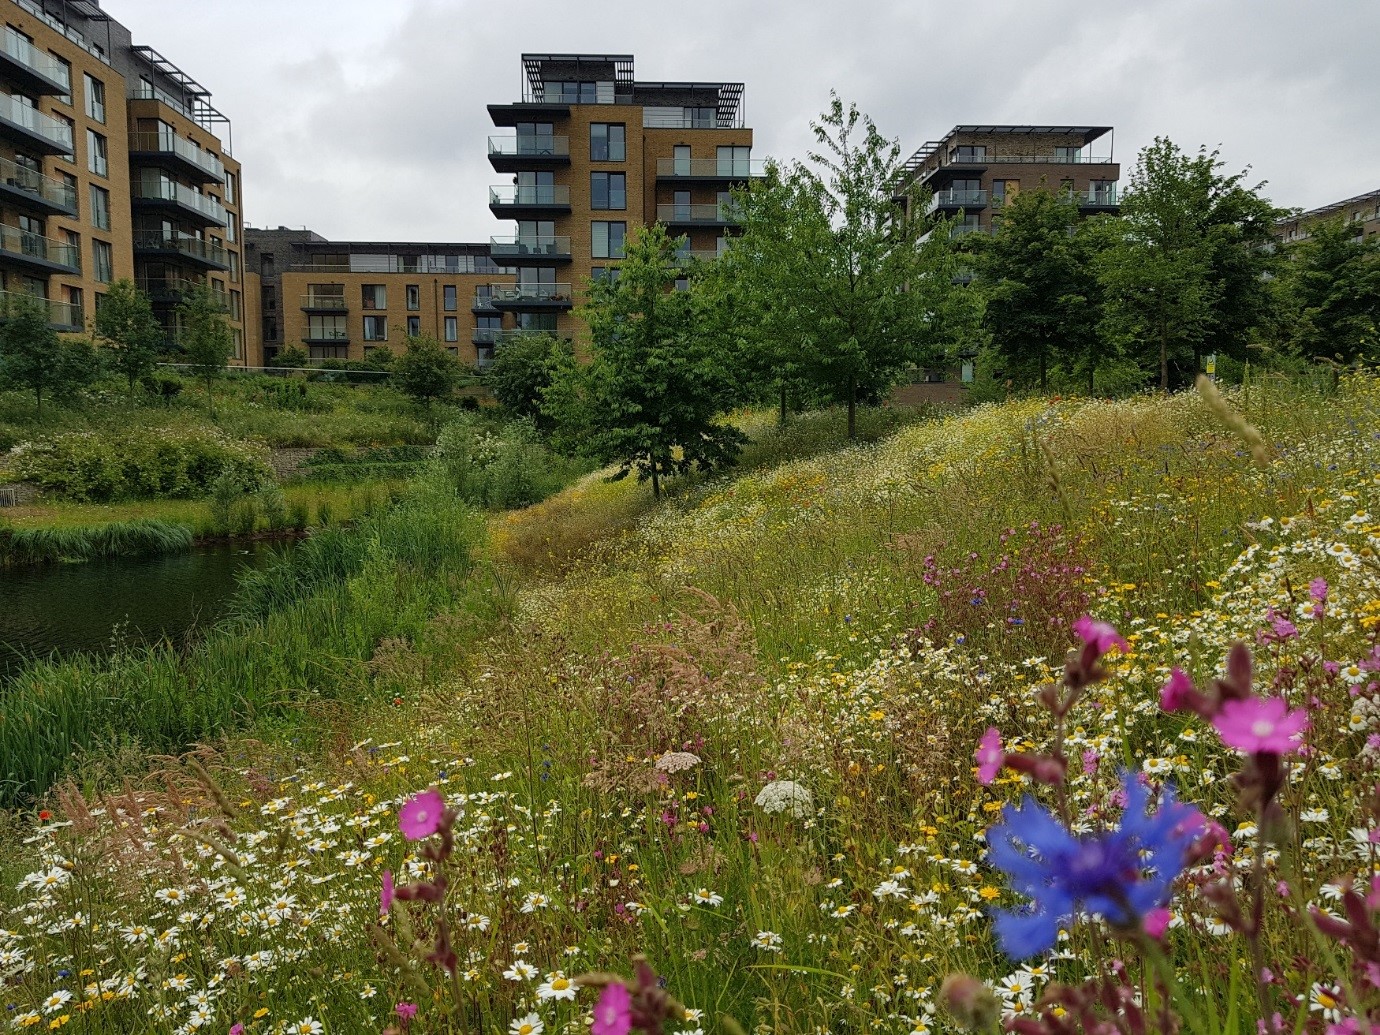 Picture of biodiverse grassland and tree planting with housing in background at Kidbrooke Village in southeast London